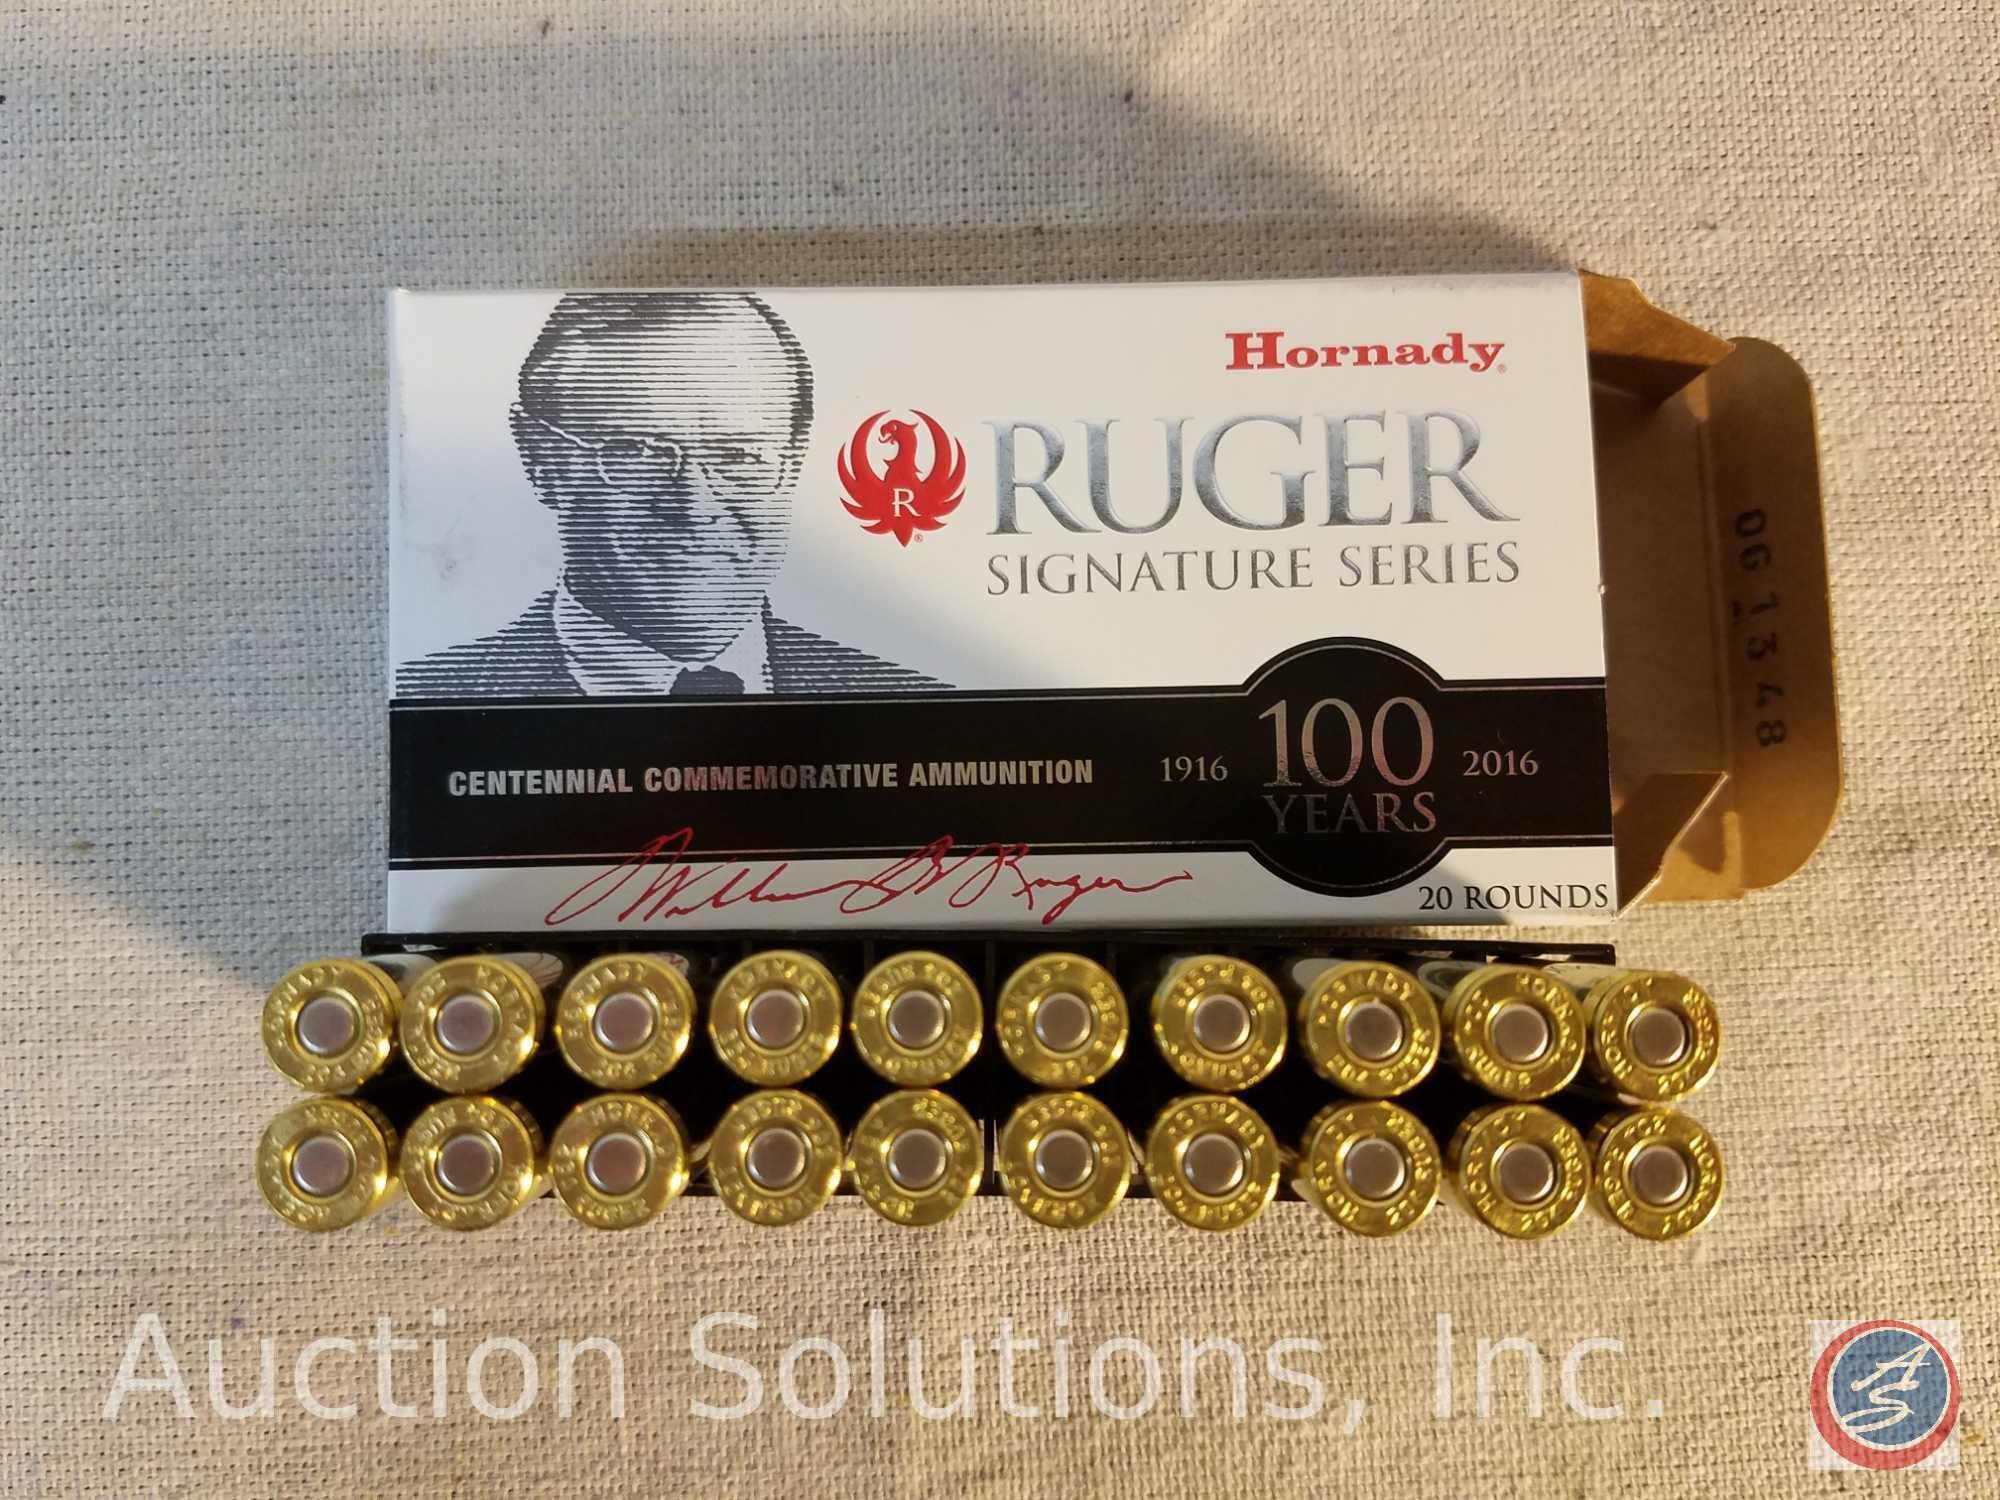 (4) boxes of Hornady 204 Ruger centennial commemorative ammunition [SOLD 4x THE MONEY]